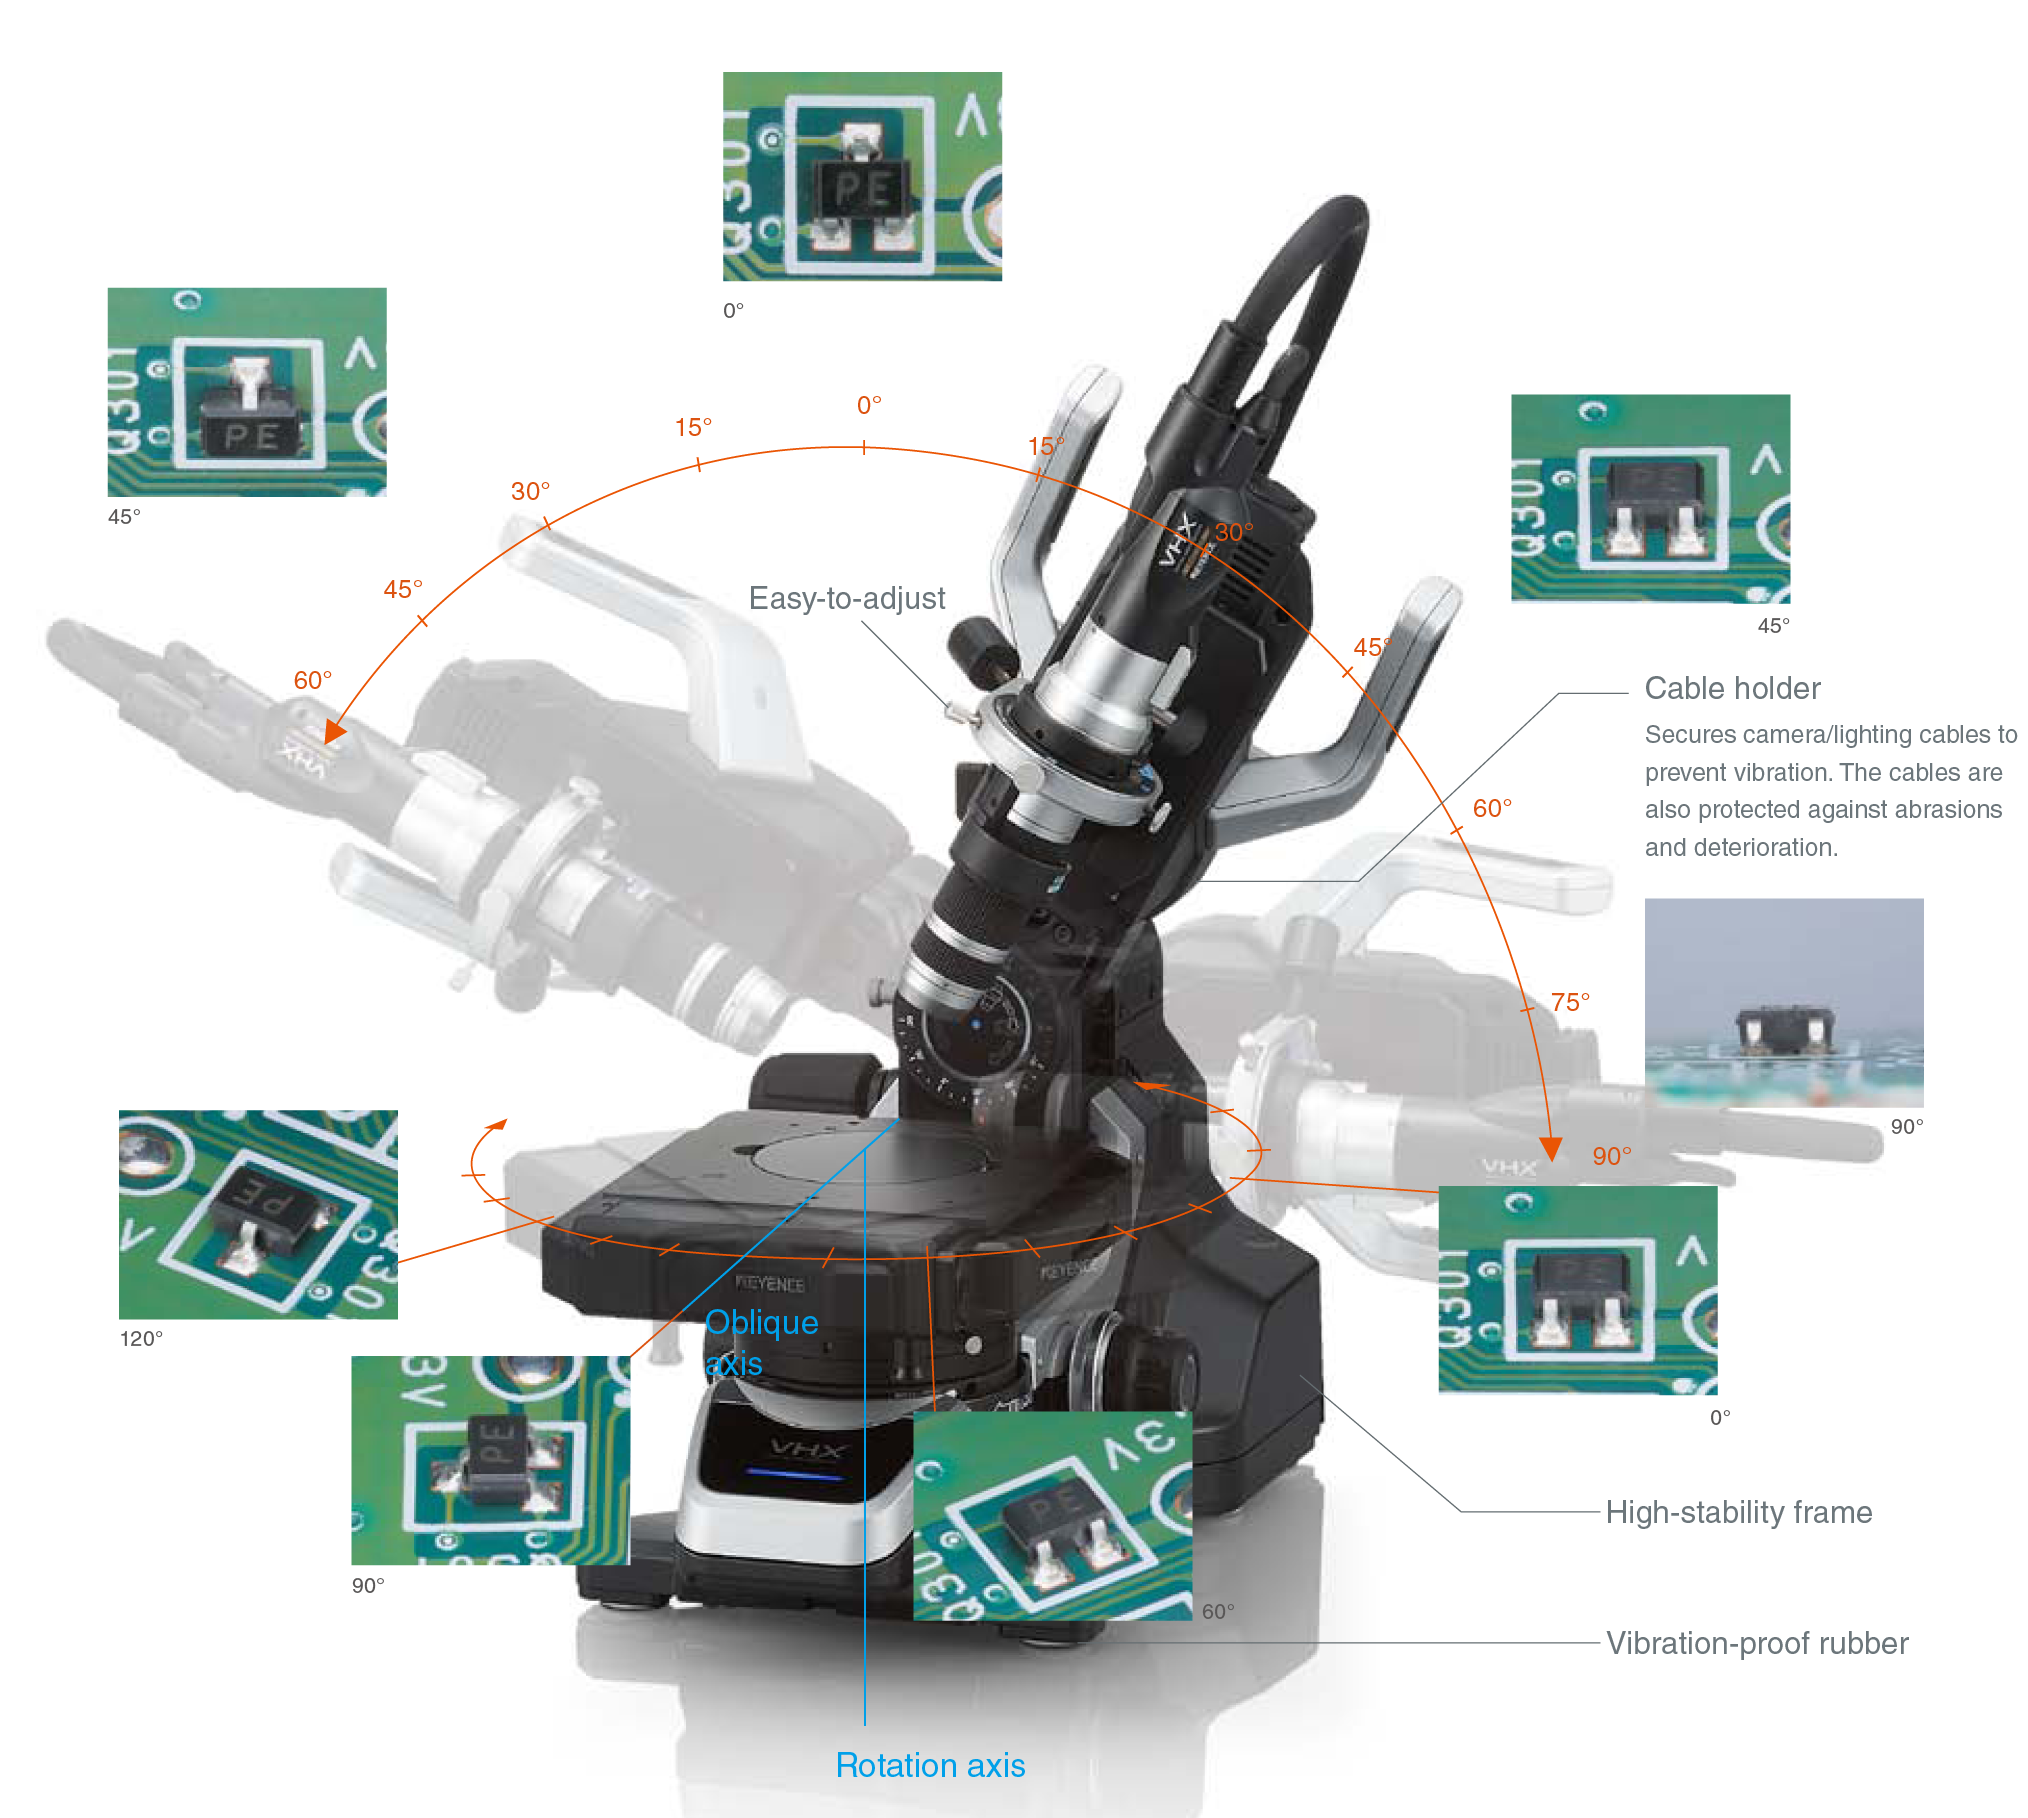 Keyence_digital_microscope_vhx_5000_features_Free_angle_observation_system